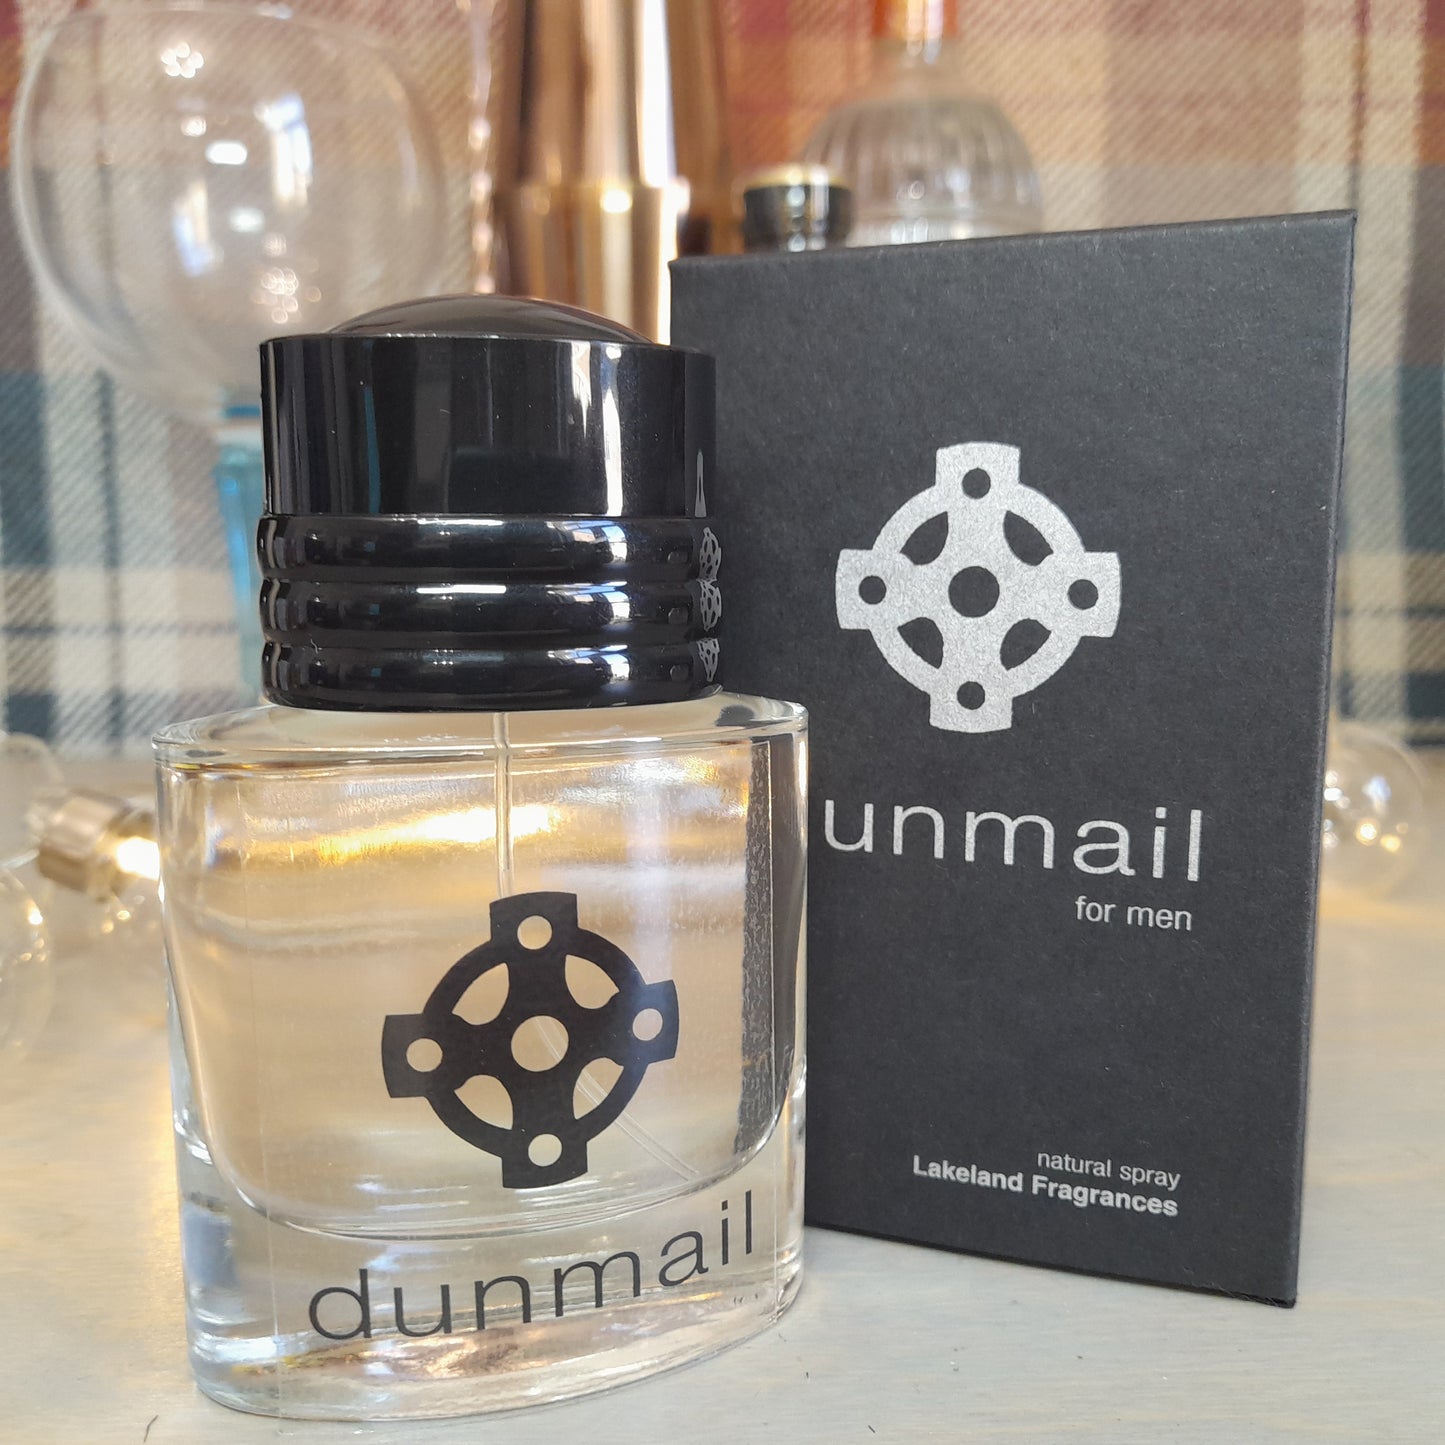 Dunmail 50ml Cologne